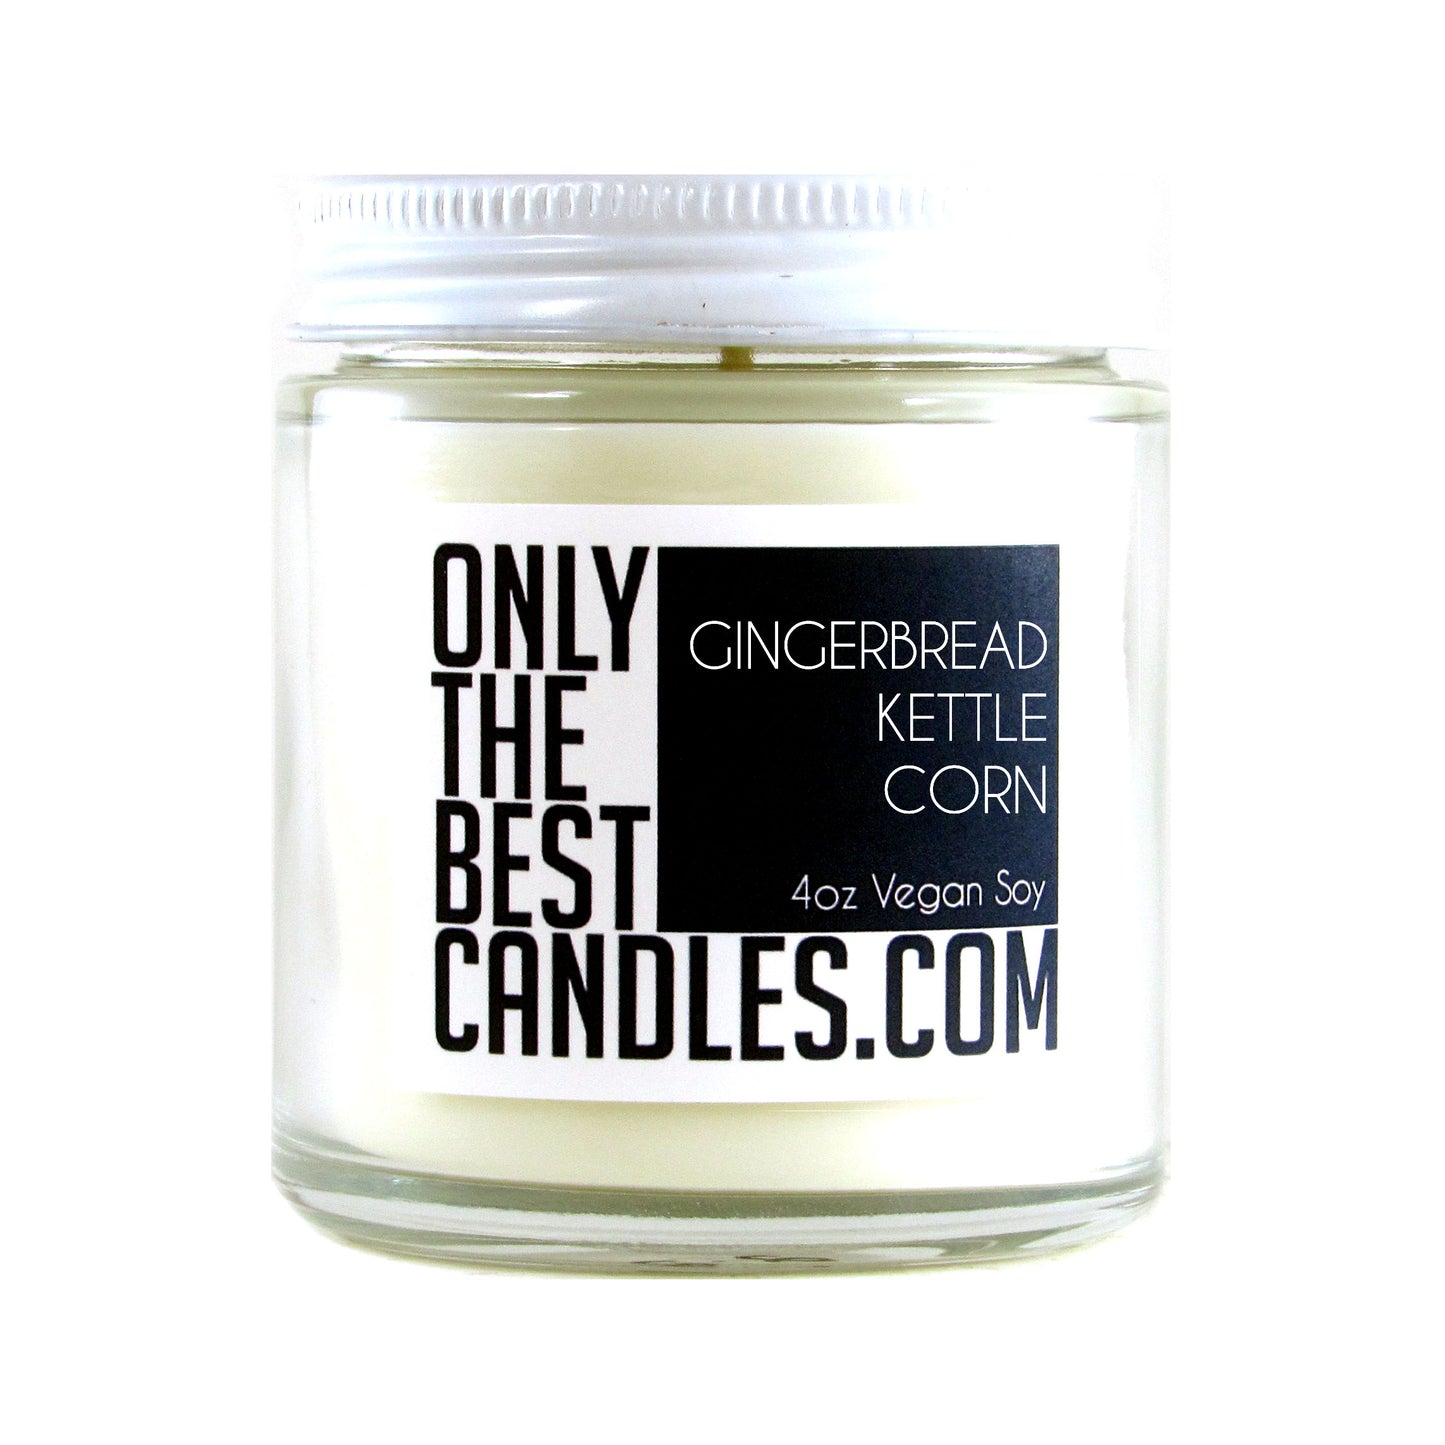 Gingerbread Kettle Corn 4oz Candle